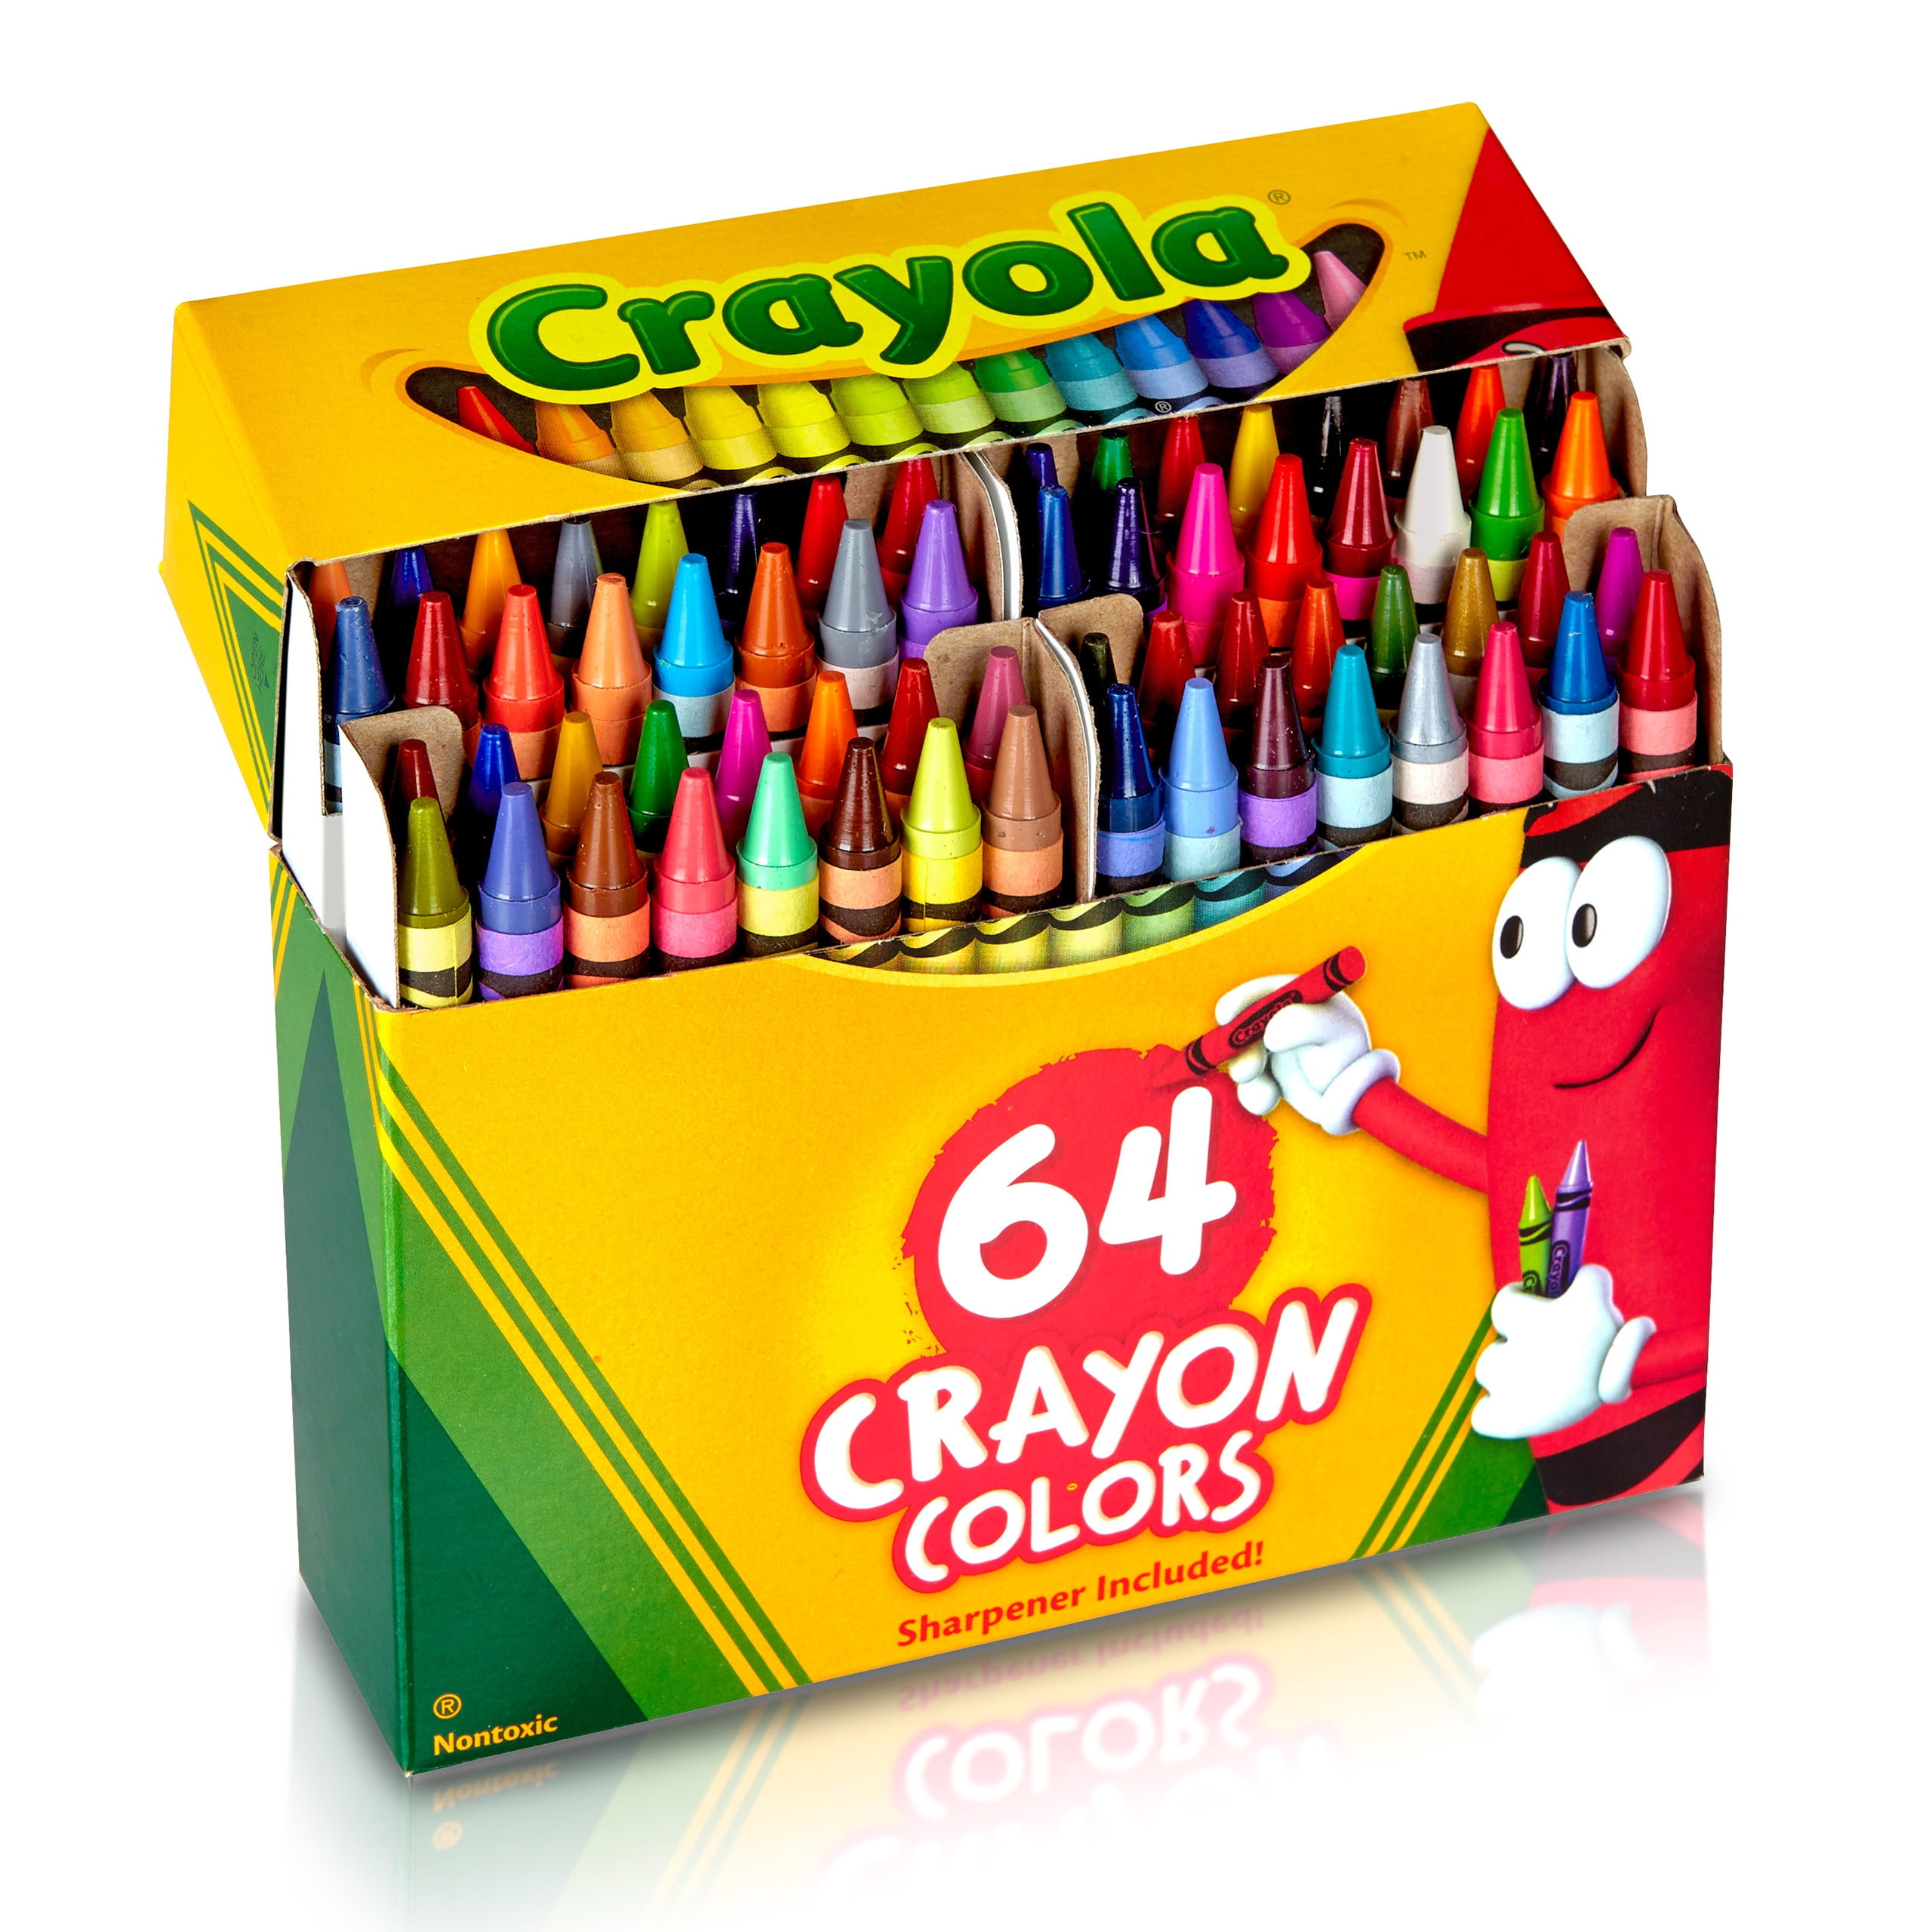 Crayola Crayons 64-CT Assorted Colors Sharpener Included Non-Toxic FREE USA SHIP 